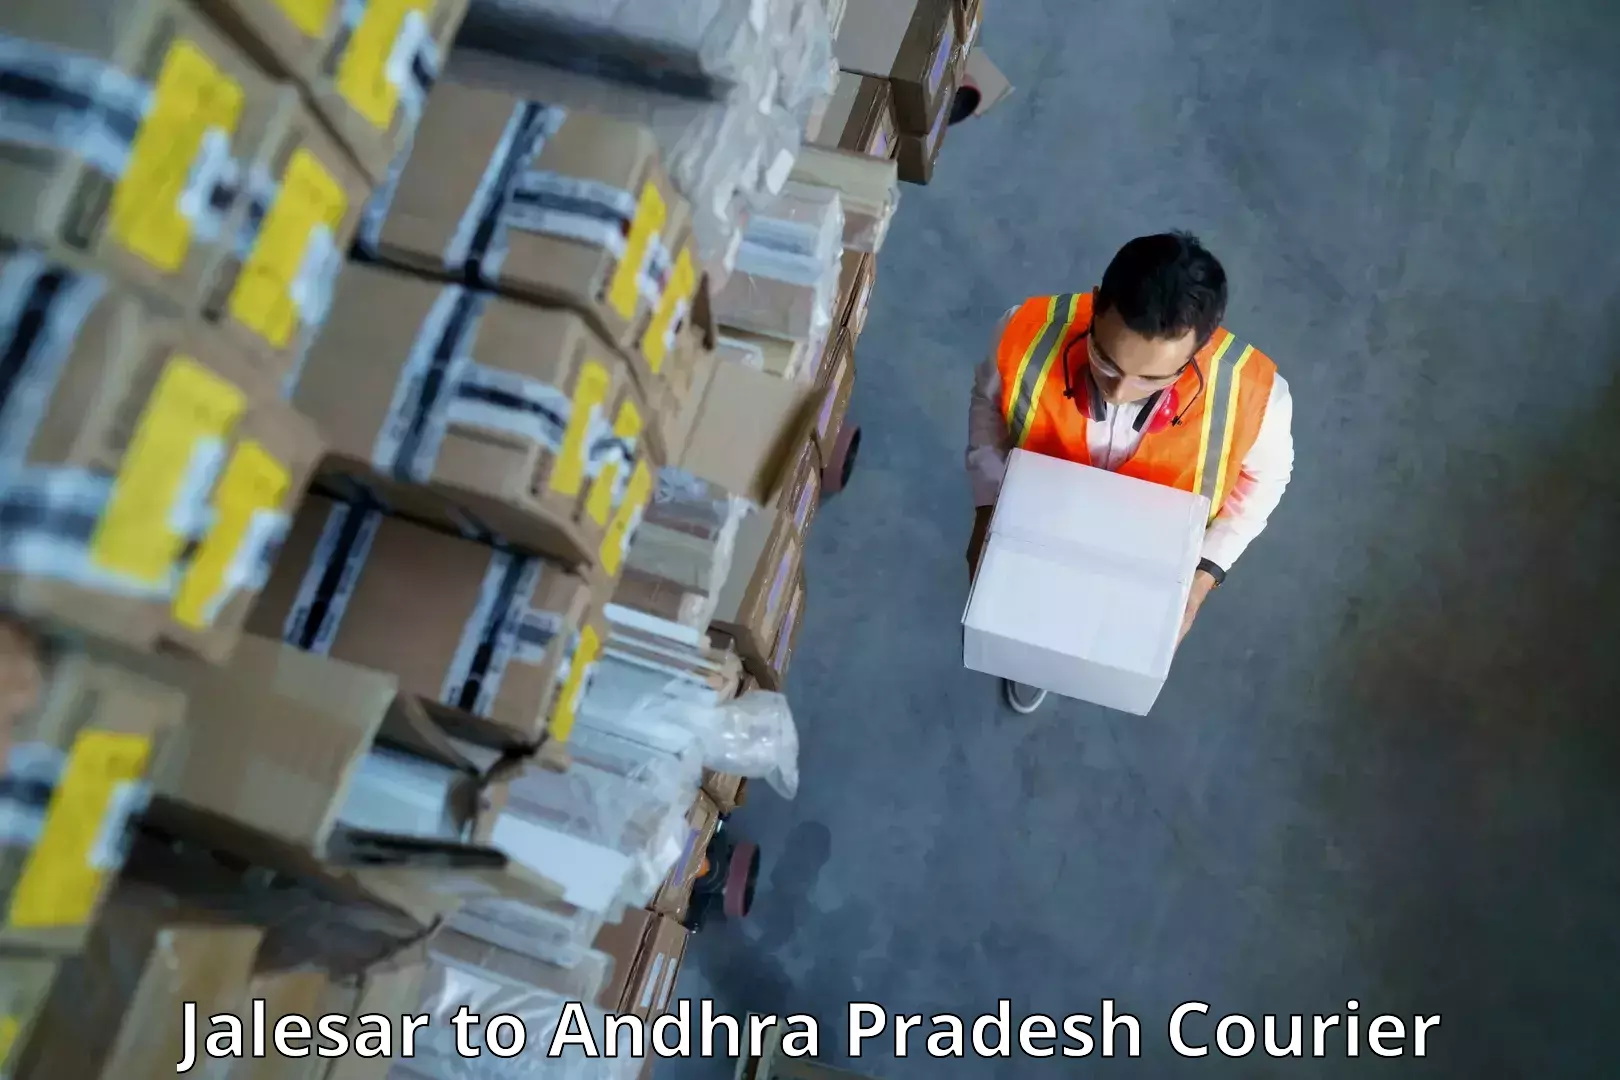 Express delivery capabilities Jalesar to Gampalagudem